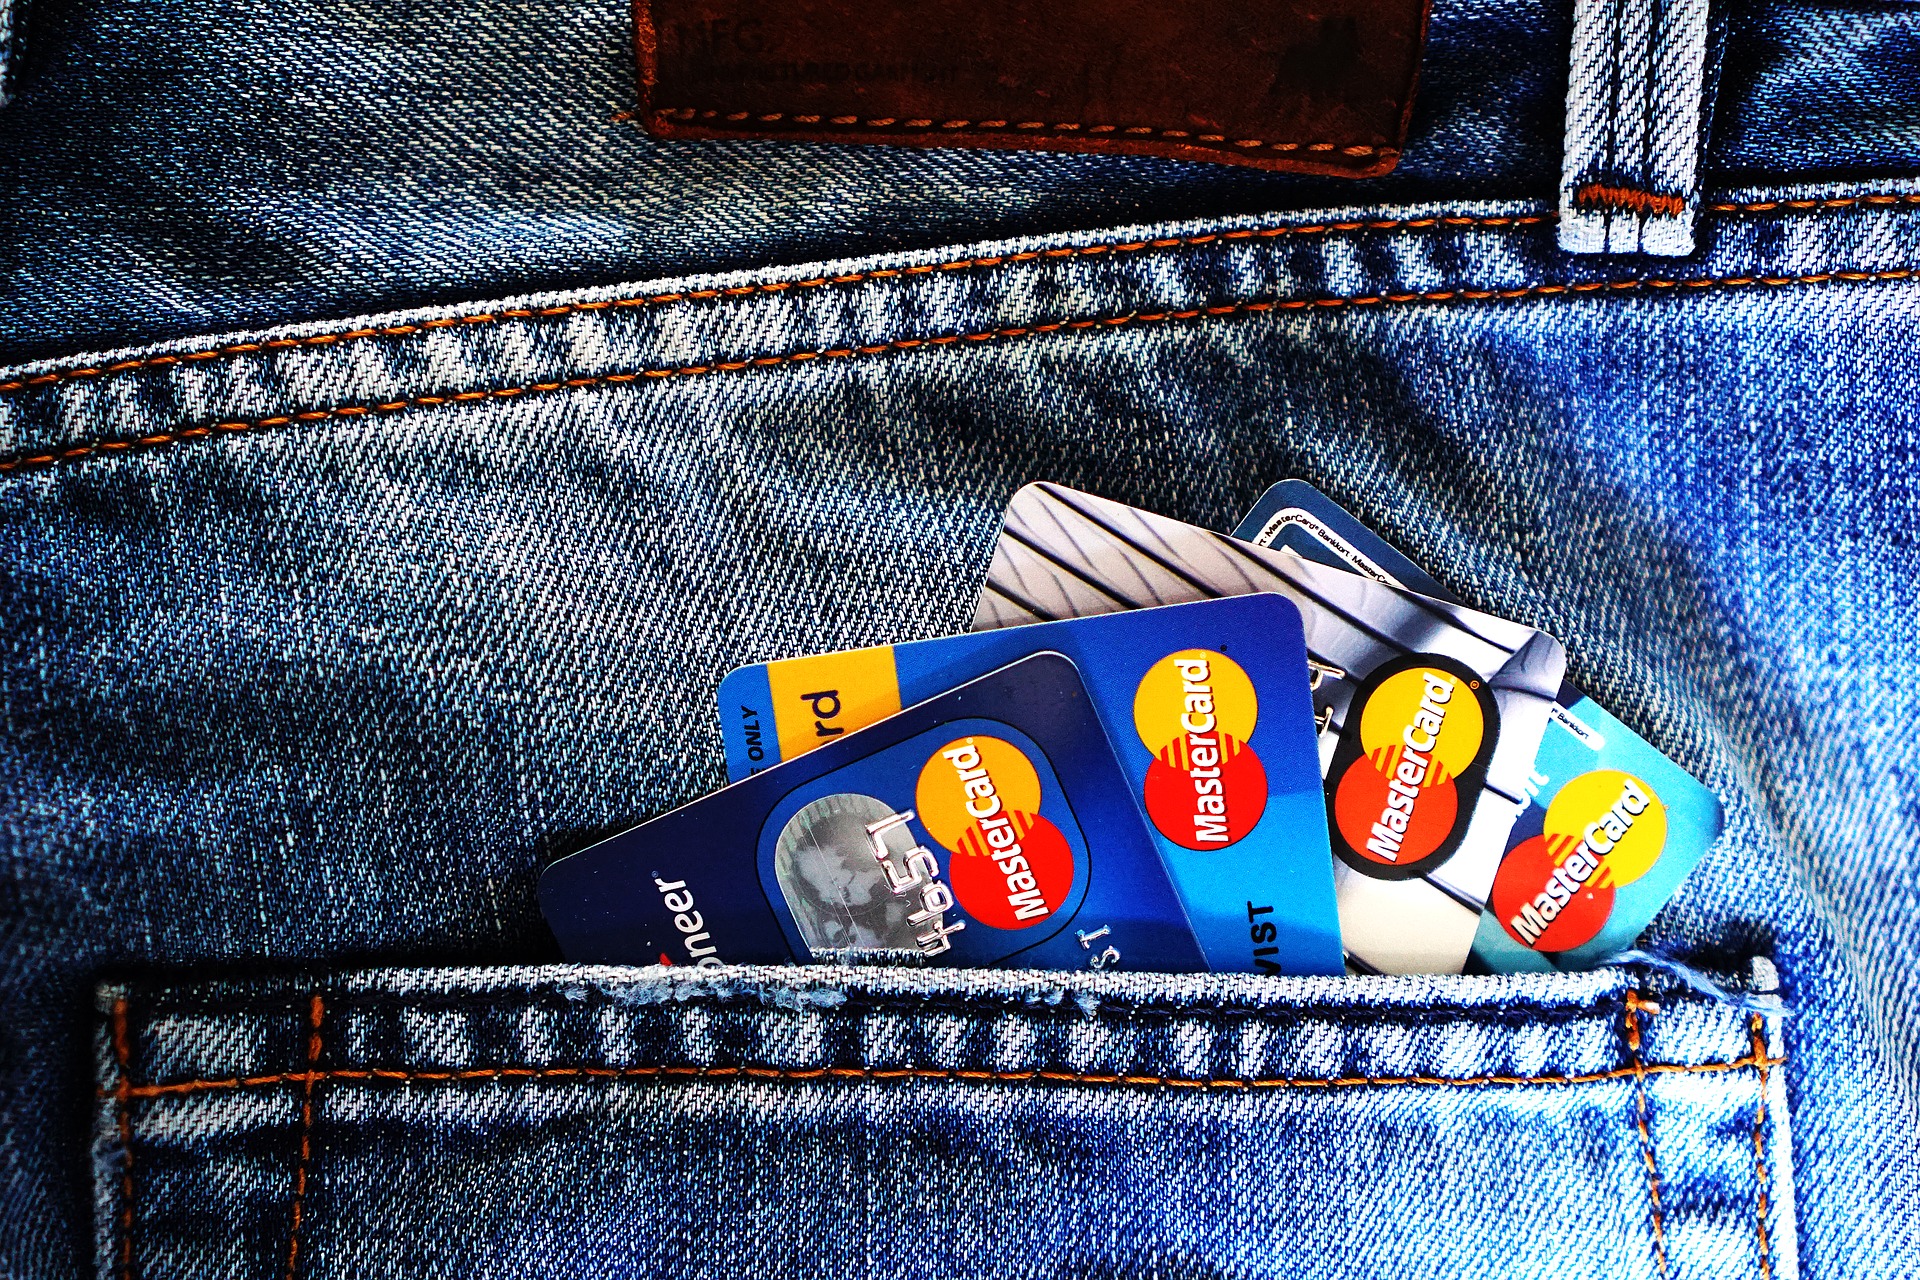 Pros & Cons Of A Credit Card